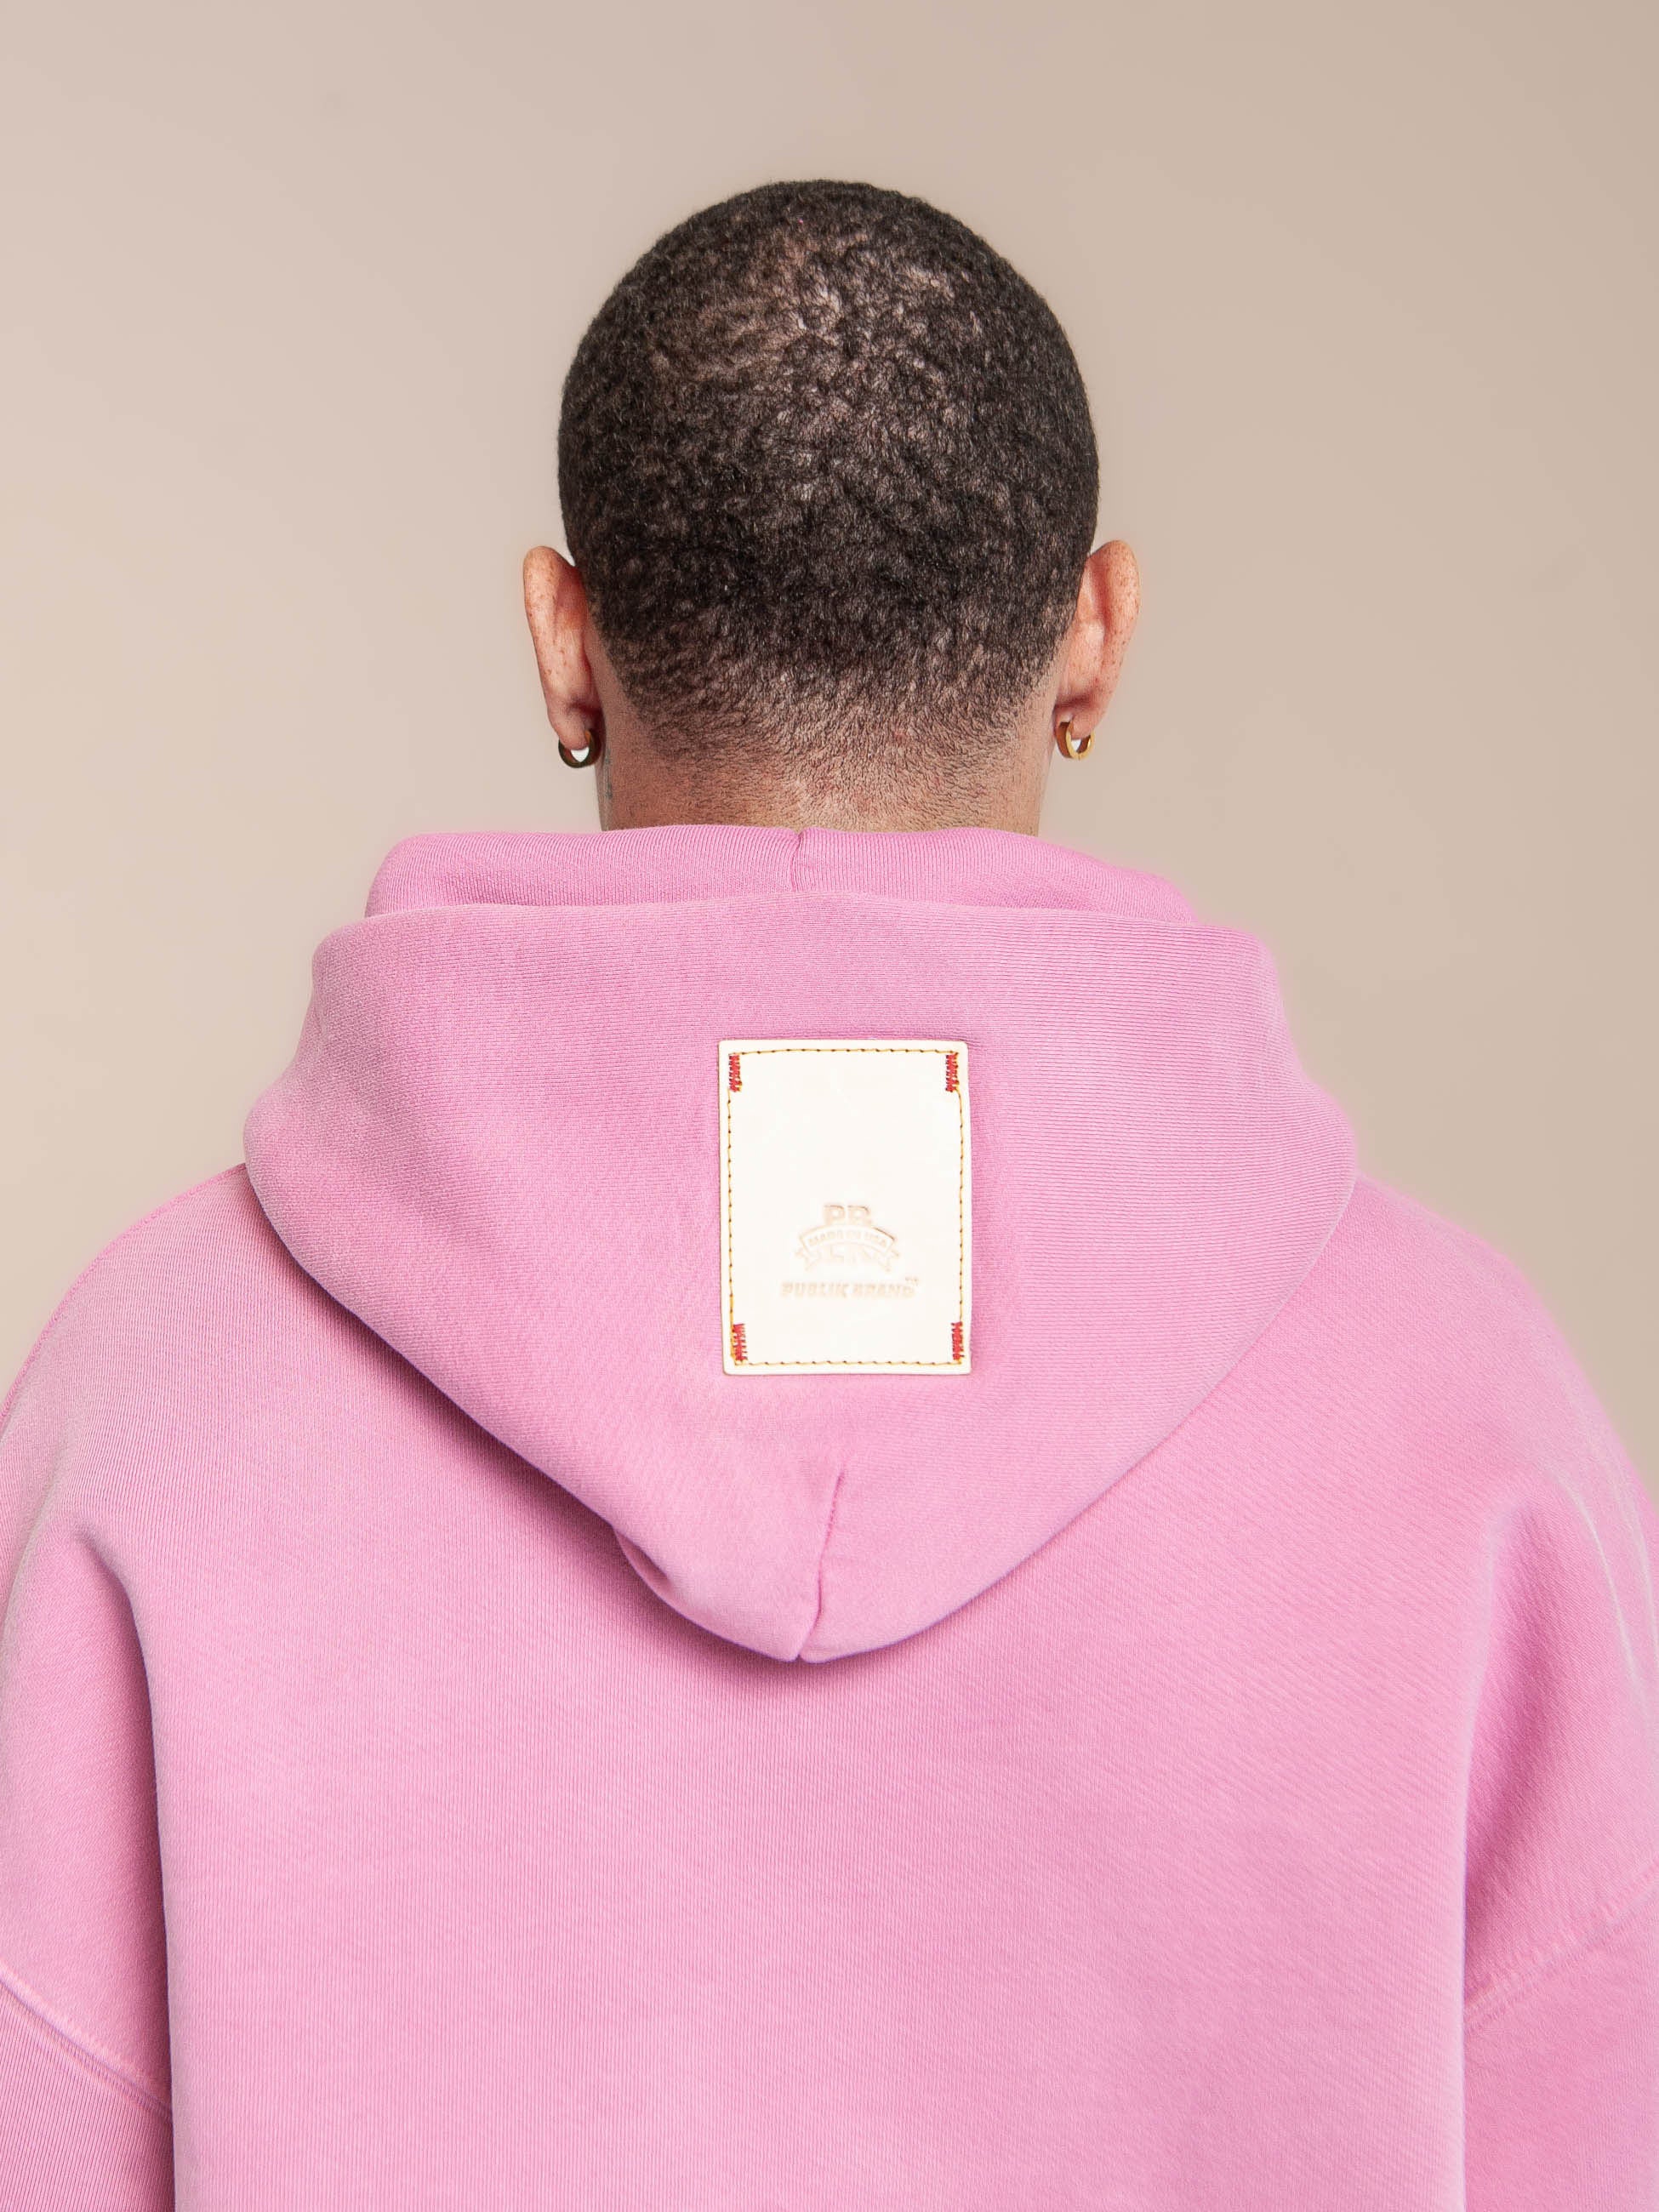 Publik Brand Single Layered Hoodie Hollywood Cerise Pink Heavyweight Fleece, all made in USA, back side detail